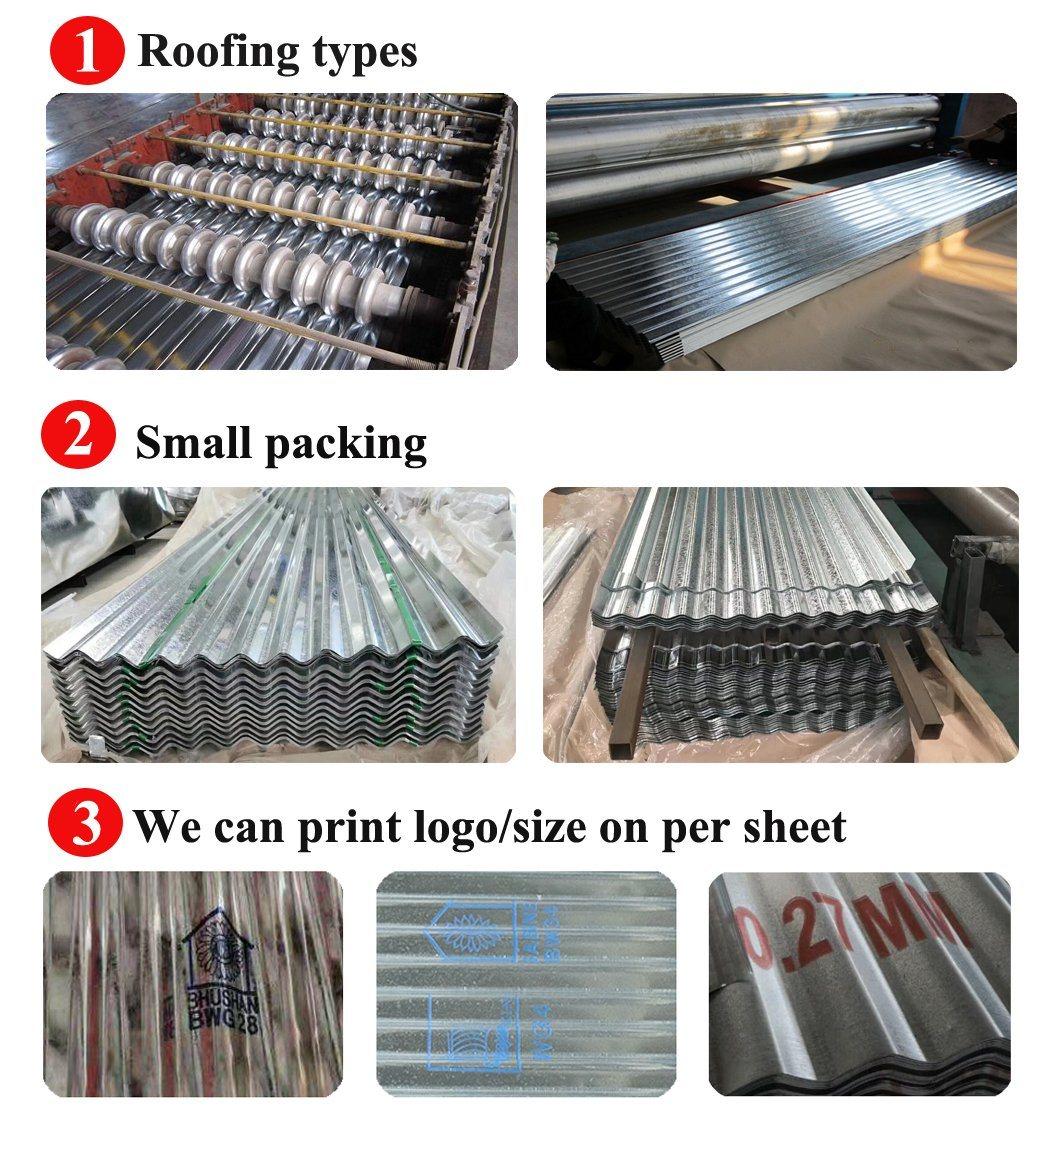 Bwg28 Hot Dipped Galvanized Corrugated Steel Iron Roofing Sheet